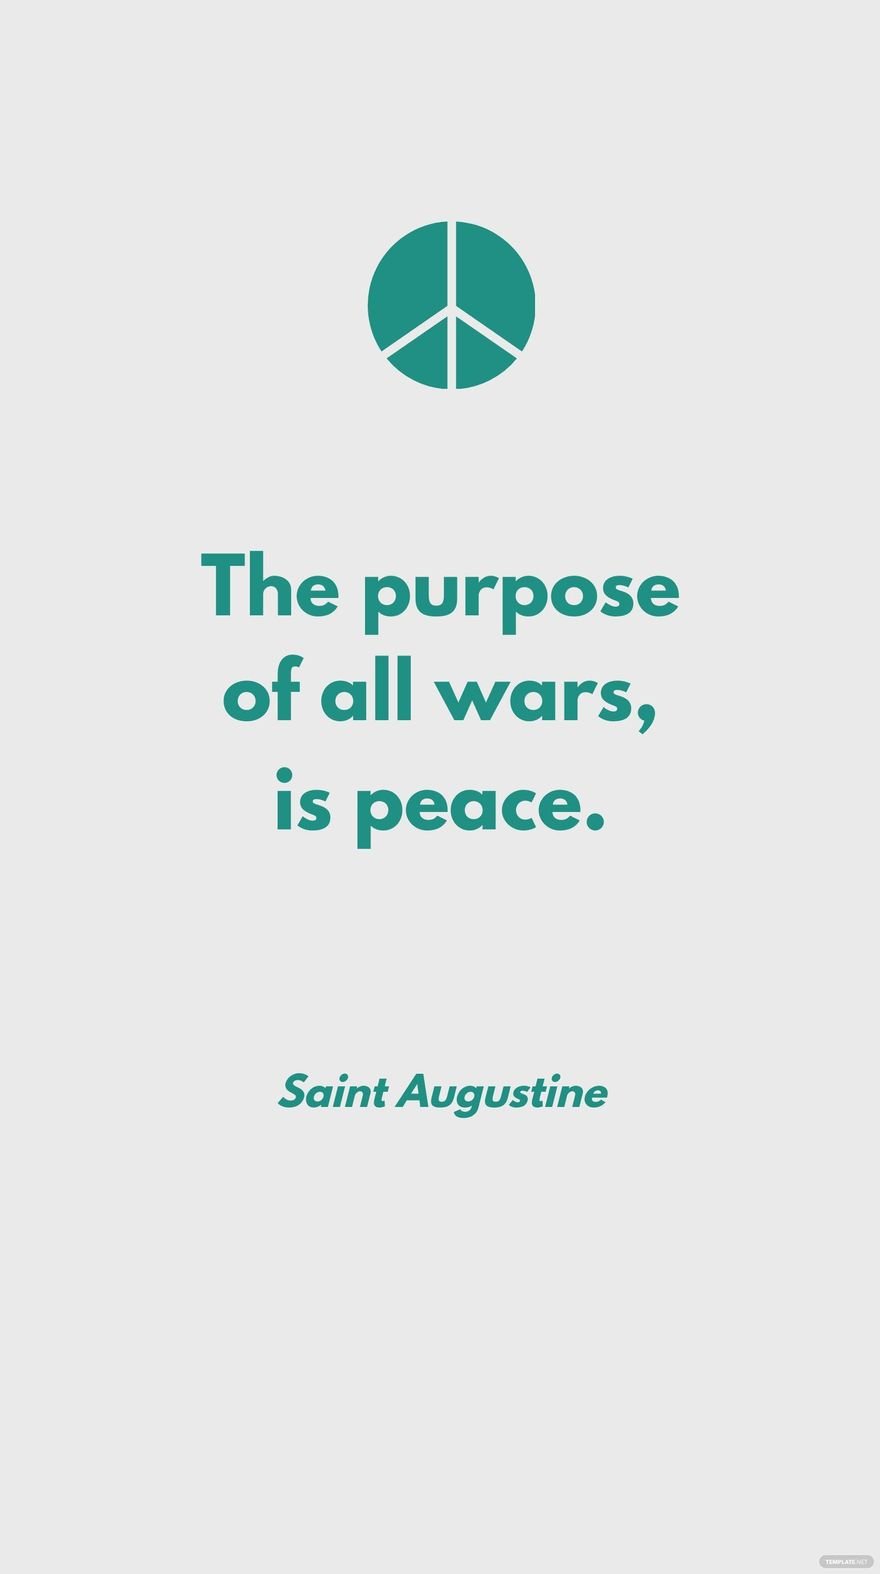 Saint Augustine - The purpose of all wars, is peace.